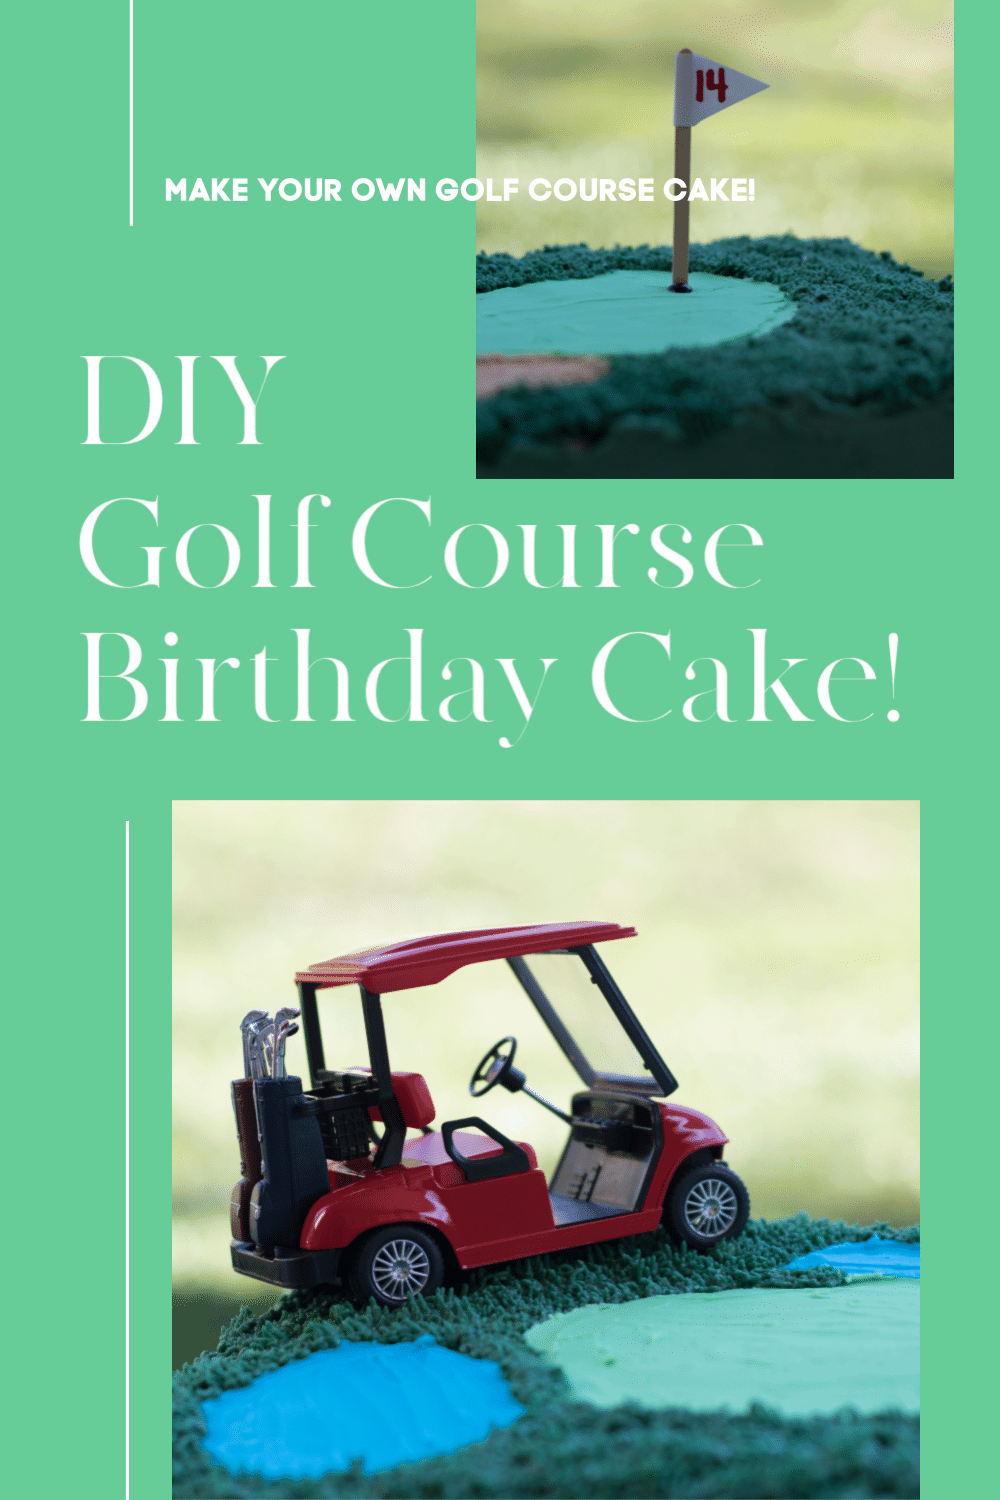 How To Make A Golf Course Birthday Cake!